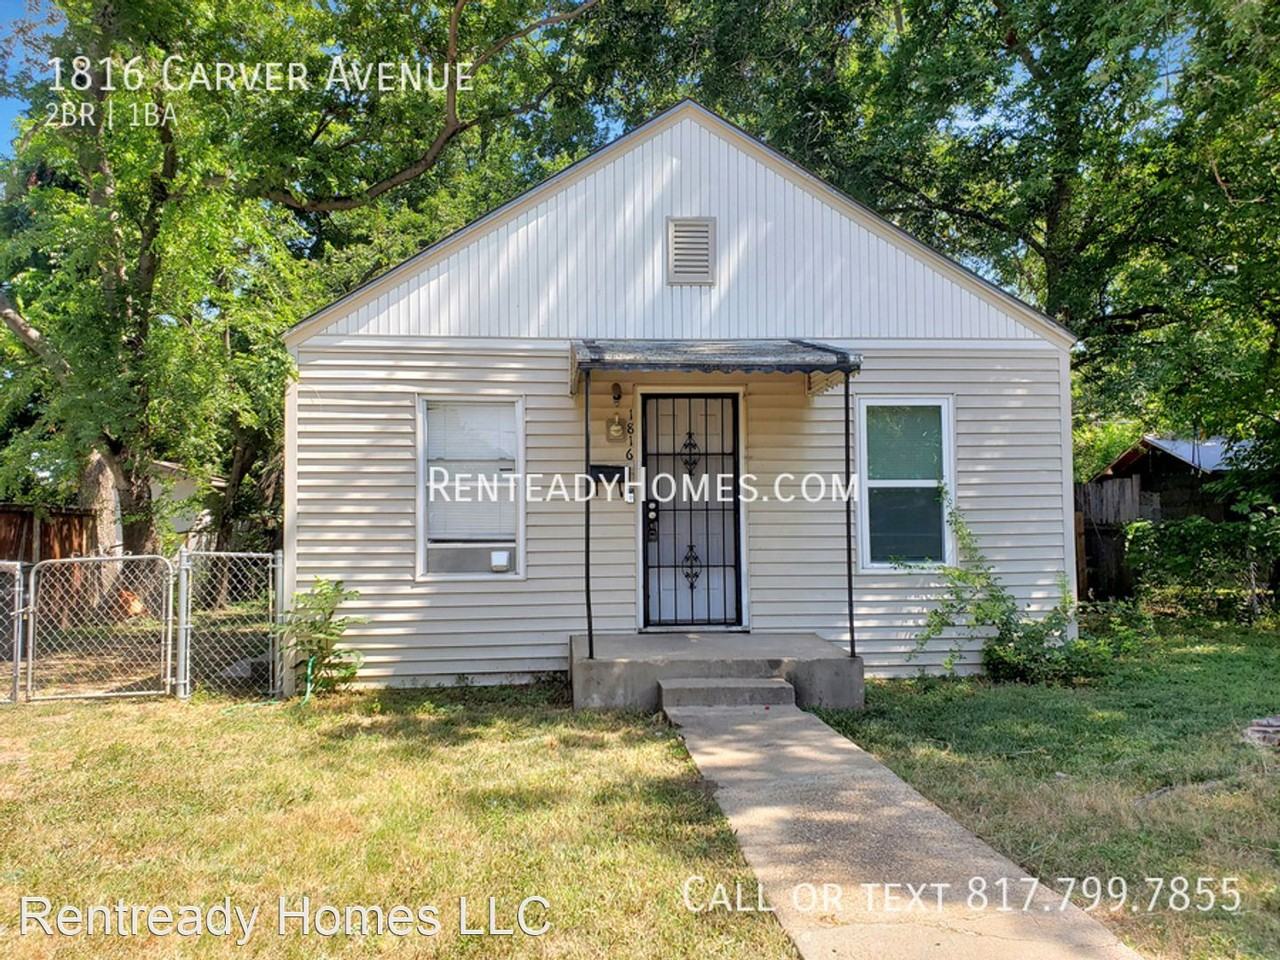 1816 Carver Ave, Fort Worth, TX 76102 2 Bedroom House for $1,475